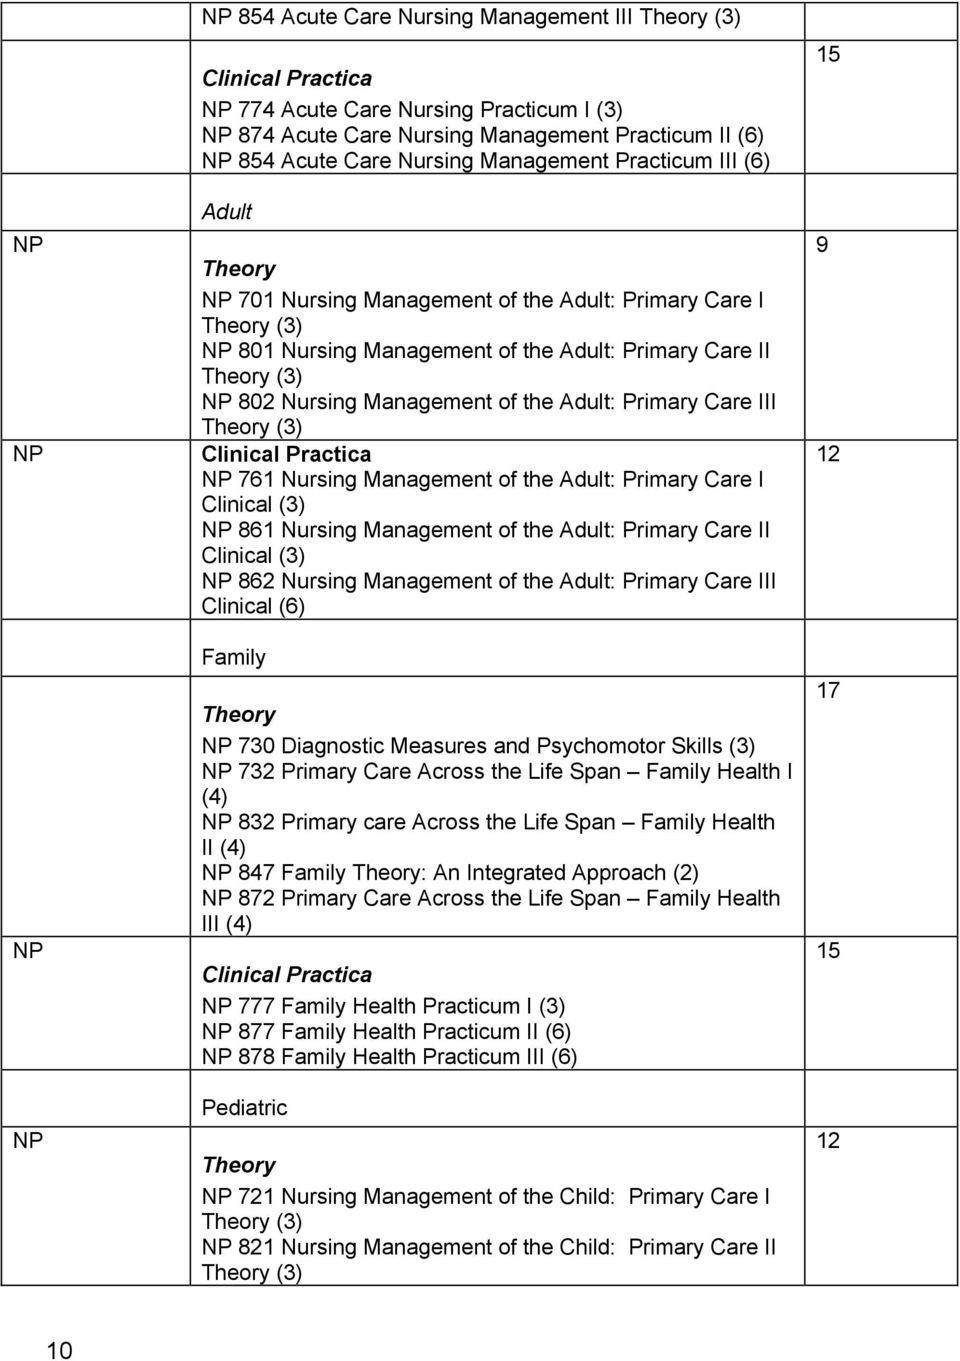 Nursing Management of the Adult: Primary Care I Clinical () 861 Nursing Management of the Adult: Primary Care II Clinical () 862 Nursing Management of the Adult: Primary Care III Clinical (6) Family